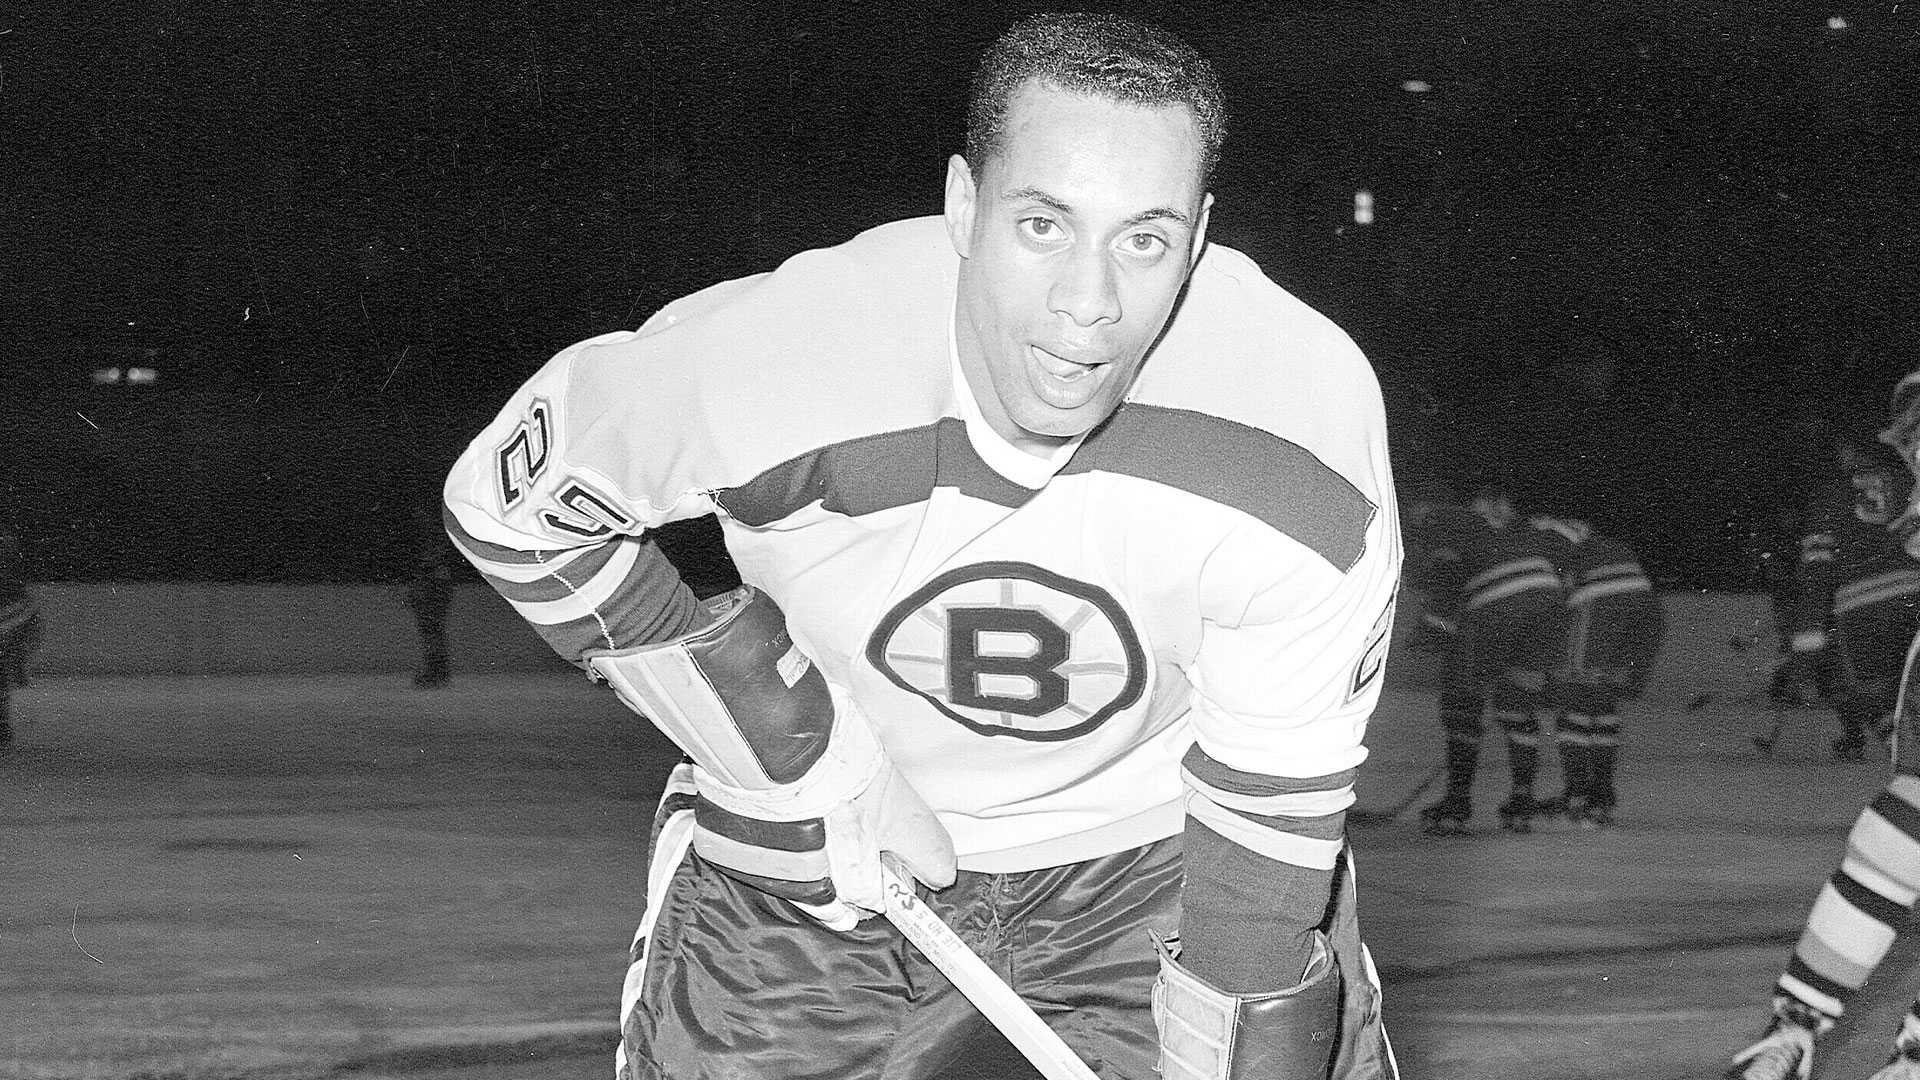 Willie O'Ree honored with jersey retirement, Congressional